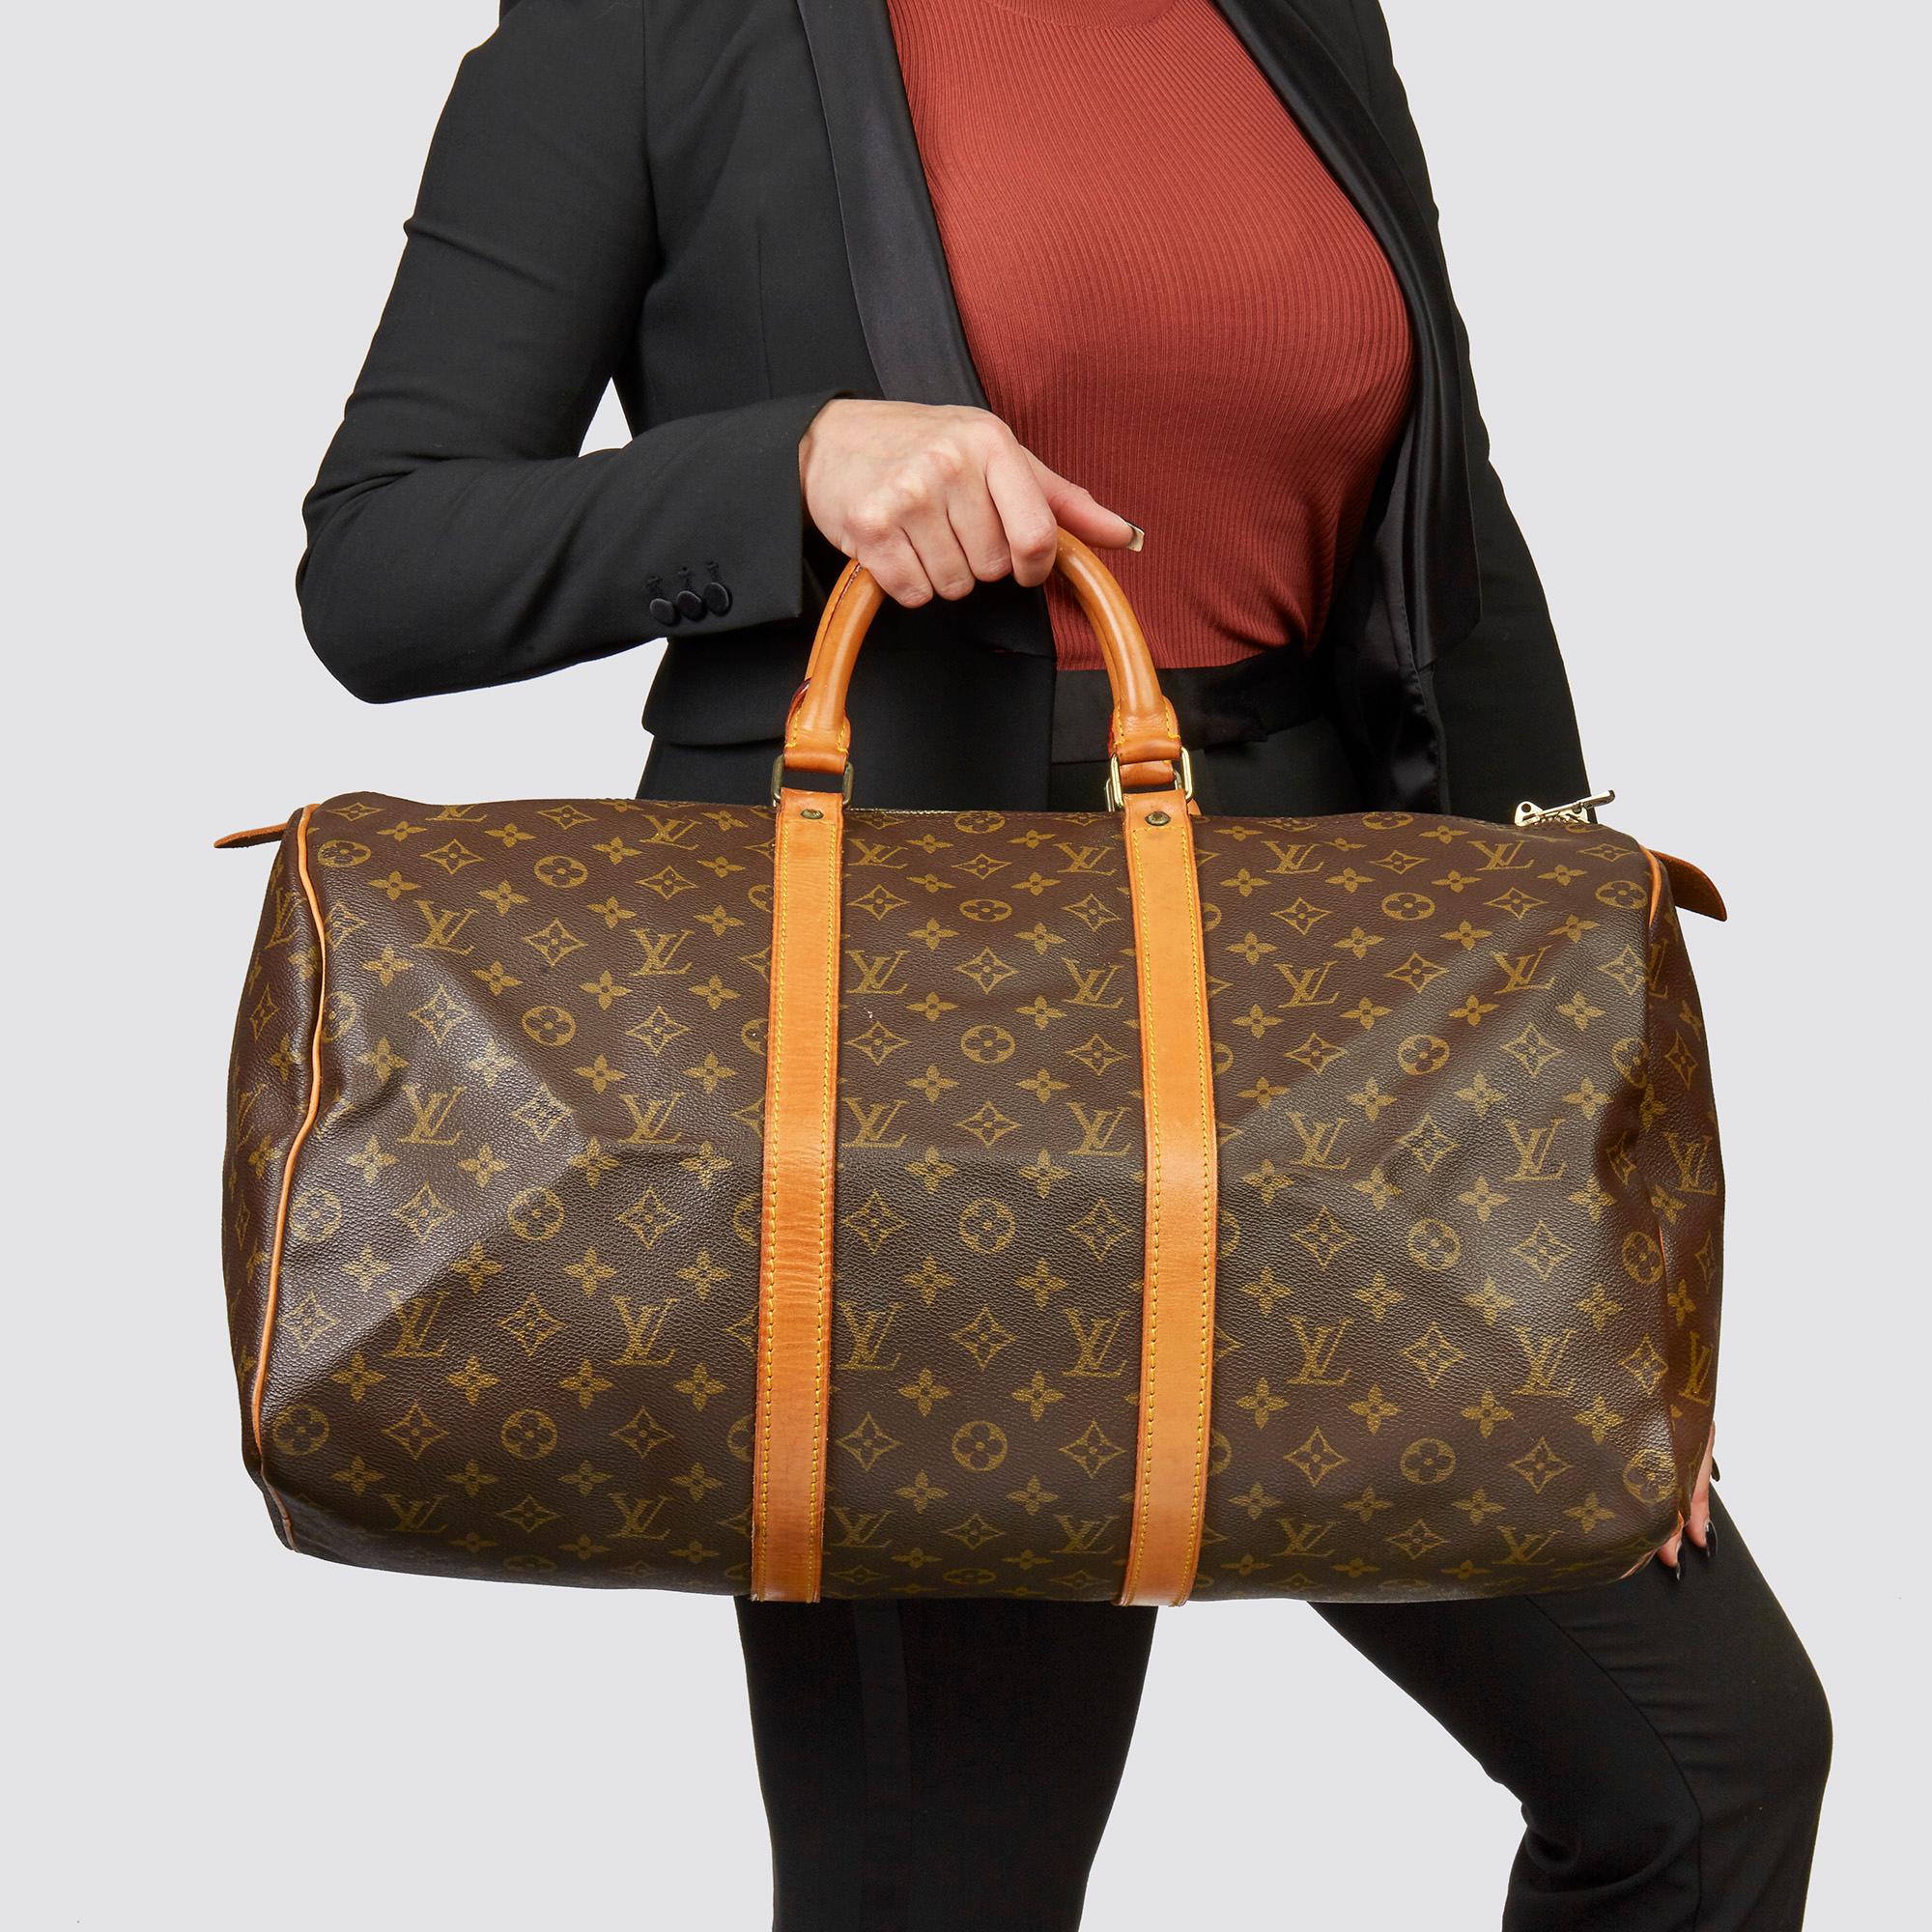 LOUIS VUITTON
Brown Monogram Coated Canvas & Vachetta Leather Vintage Keepall 50

Xupes Reference: HB3568
Serial Number: SA851
Age (Circa): 1981
Accompanied By: Luggage Tag, Handle Keeper
Authenticity Details: Date Stamp (Made in France) 
Gender: